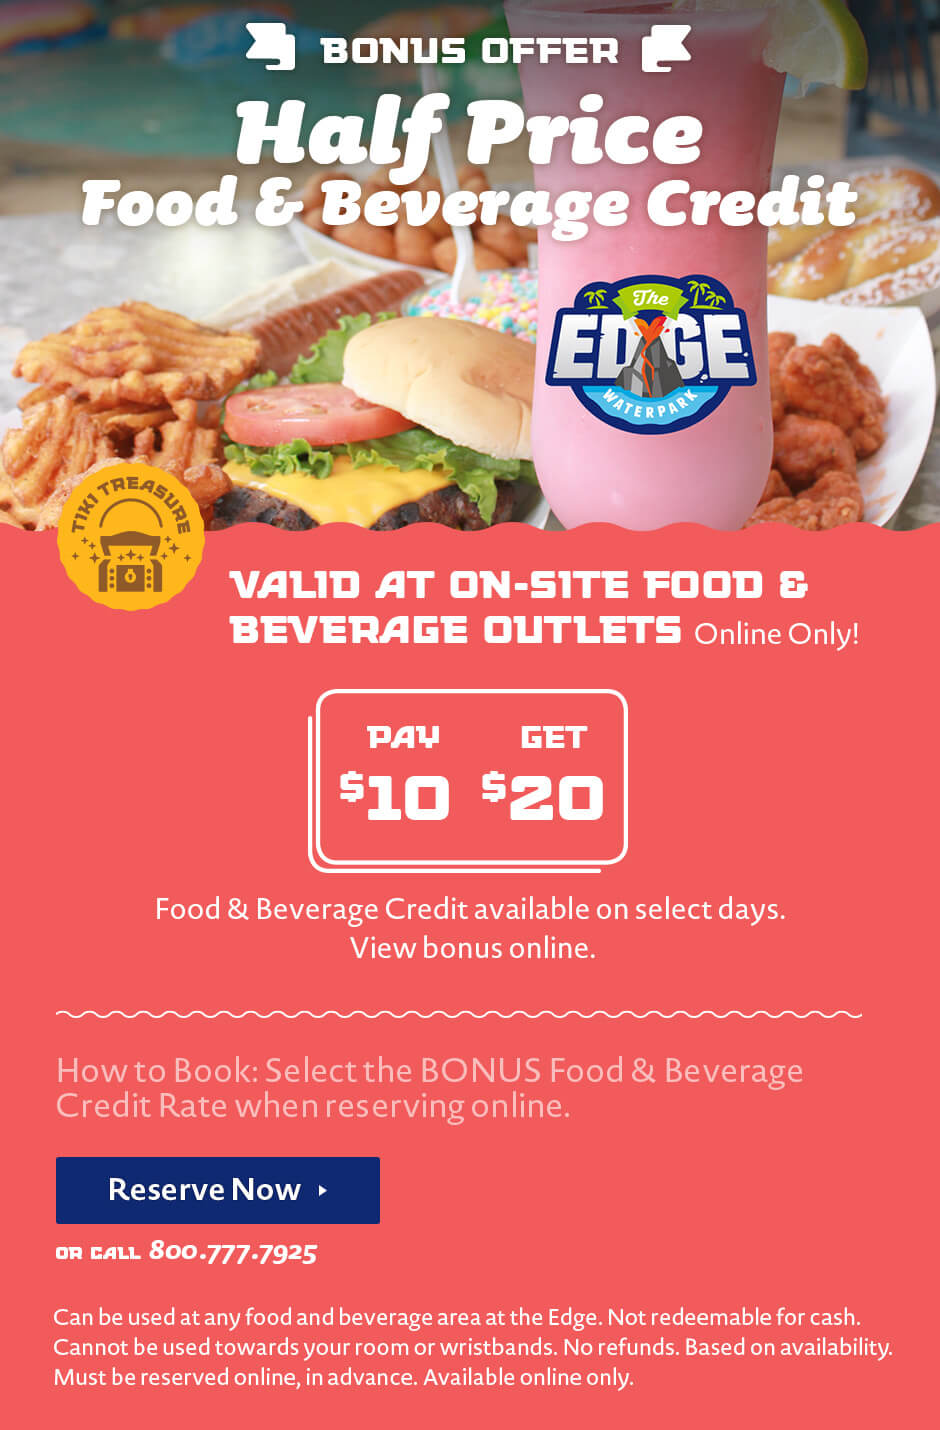 Reduced-price food offers